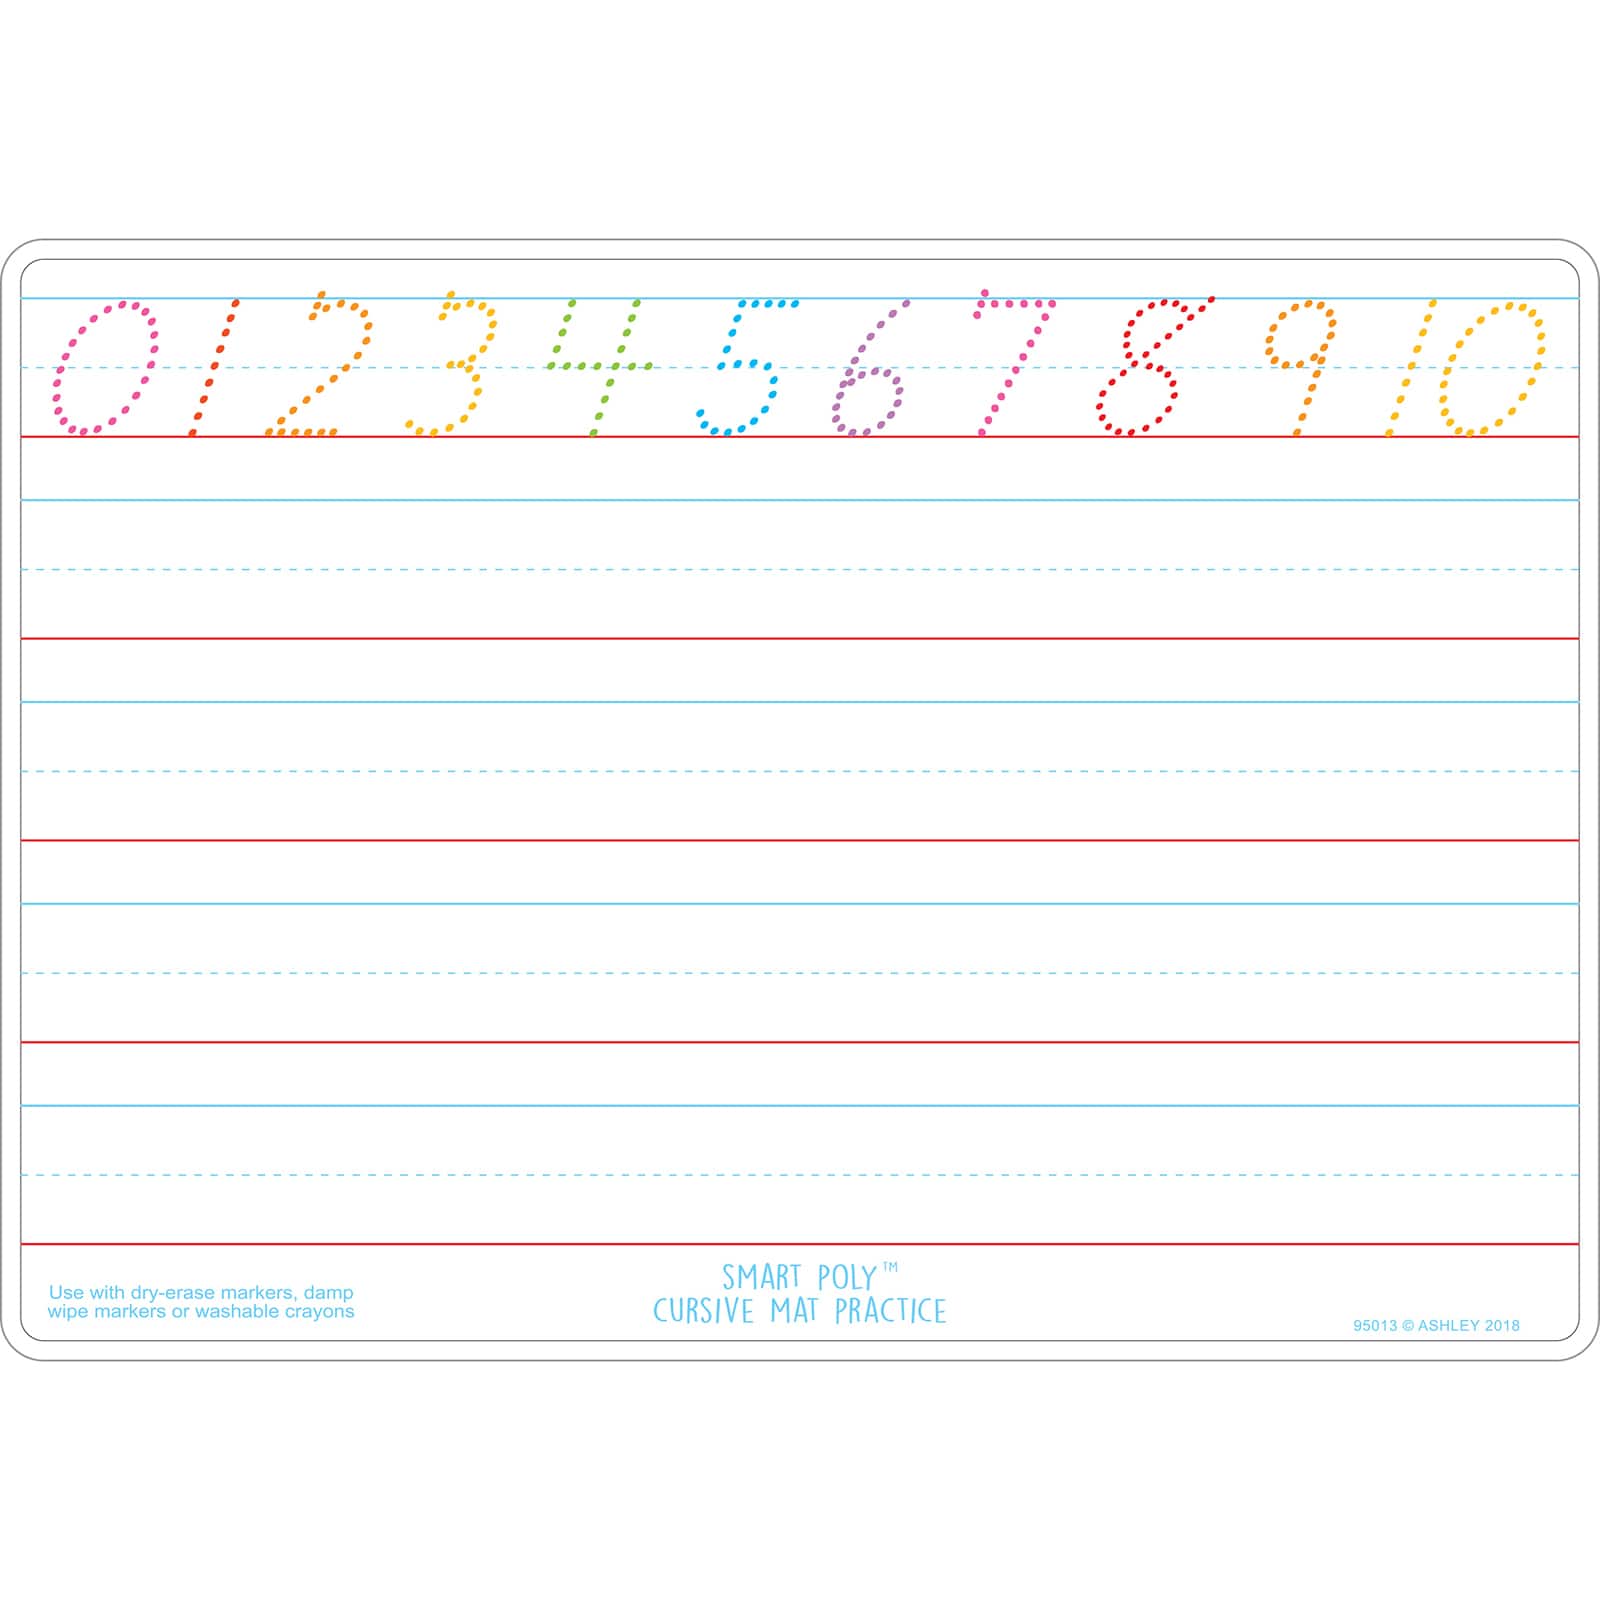 get ashley productions smart poly cursive tracing learning mats 10ct at michaels com